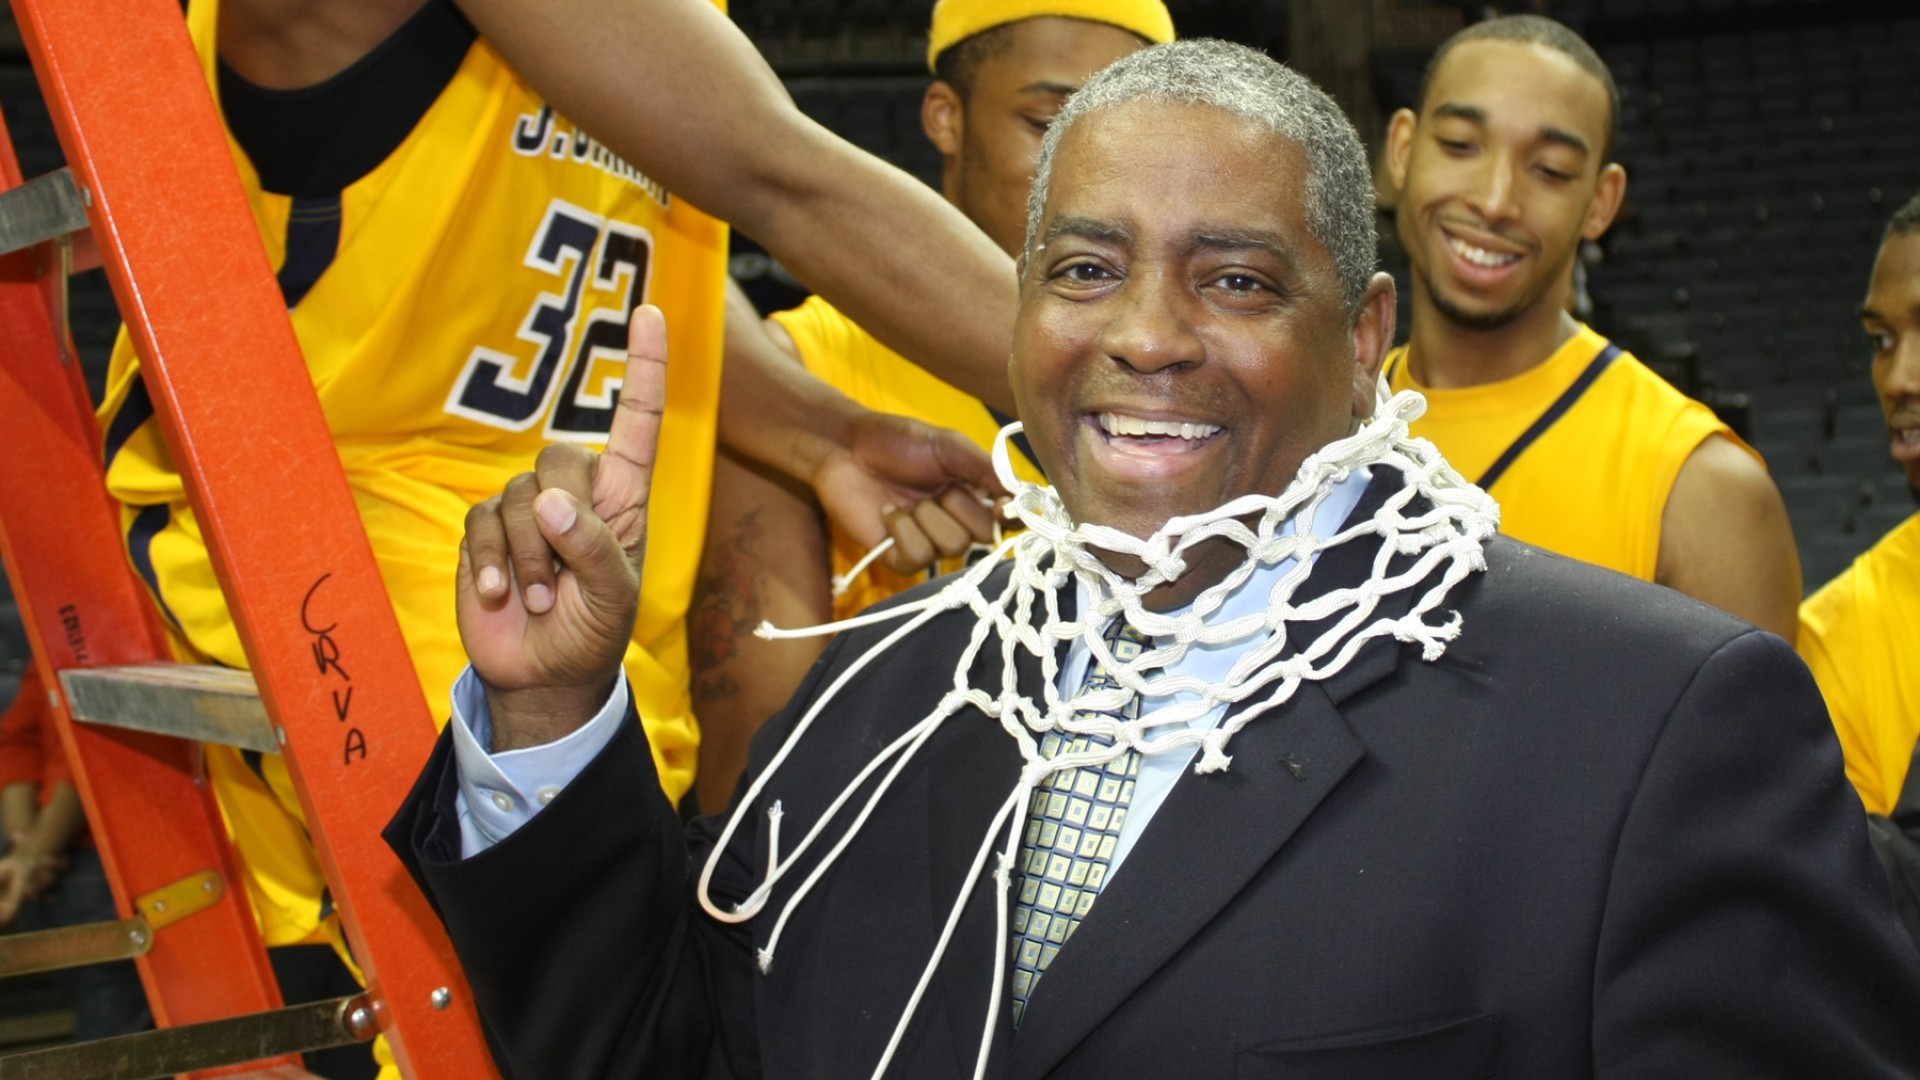 Steve Joyner Sr. With a basketball net around his neck at a CIAA Championship